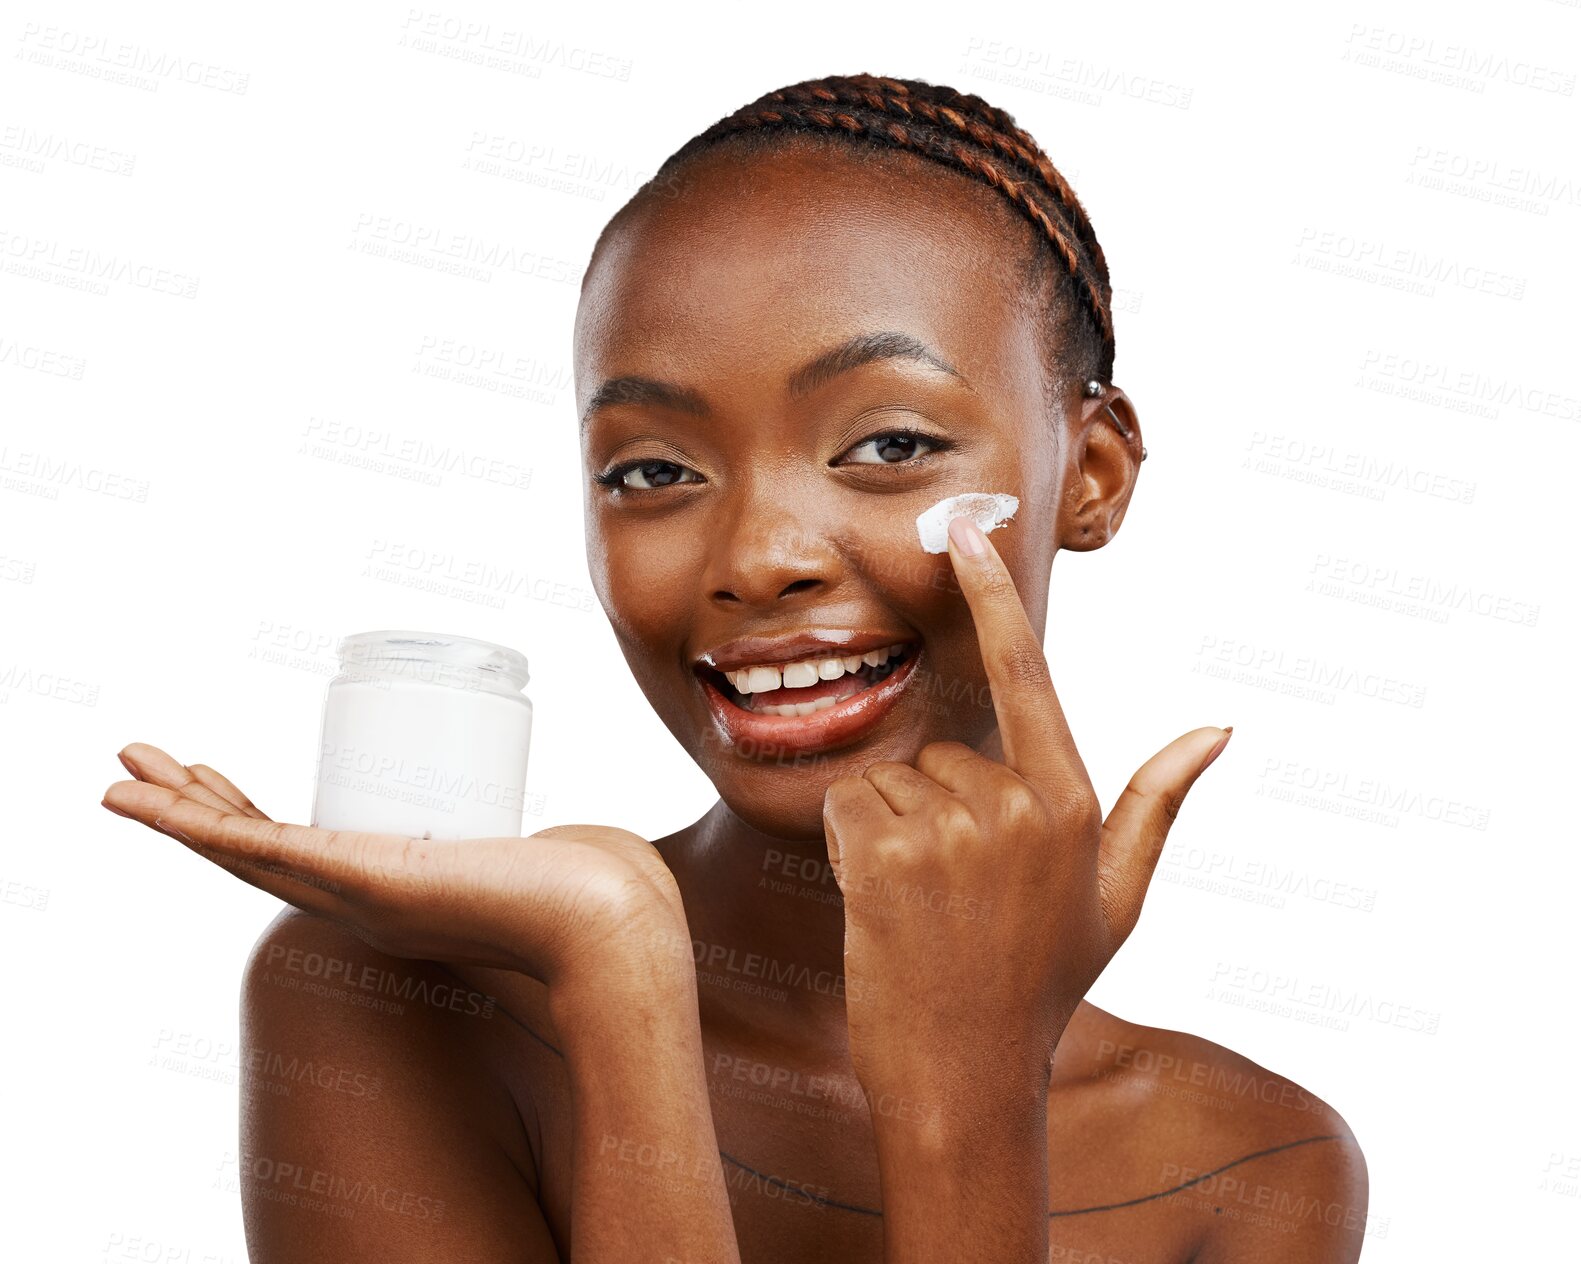 Buy stock photo Happy black woman, portrait and face cream for skincare, beauty isolated on a transparent PNG background. African female person or model smile with lotion, product or moisturizer for SPF or soft skin